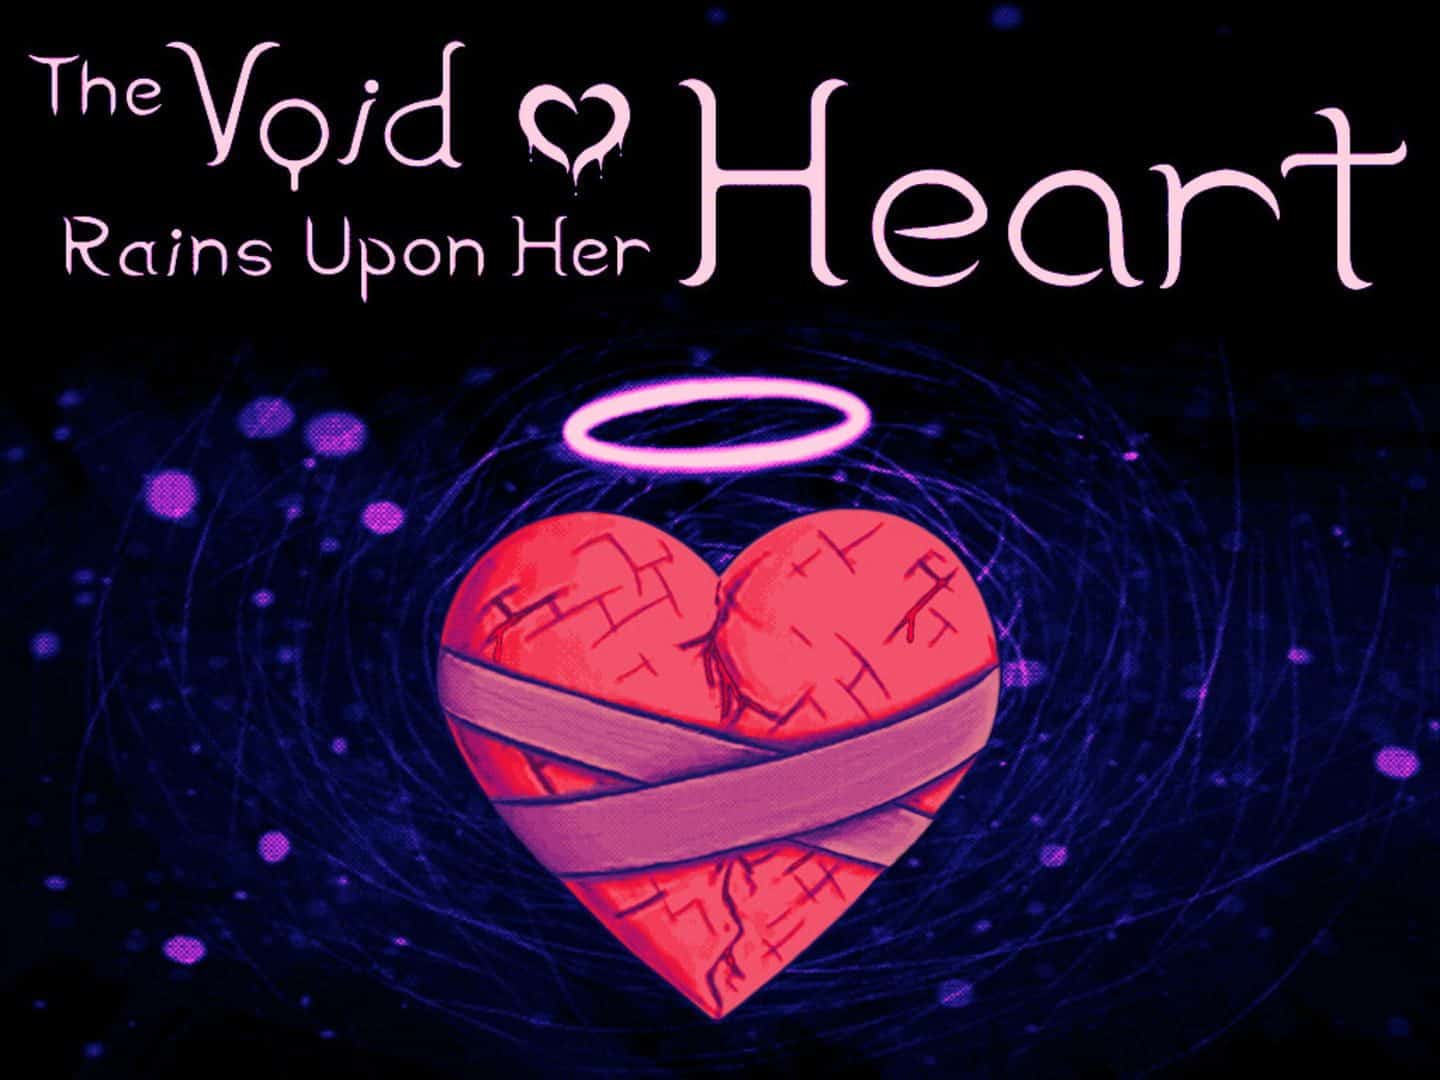 The Void Rains Upon Her Heart